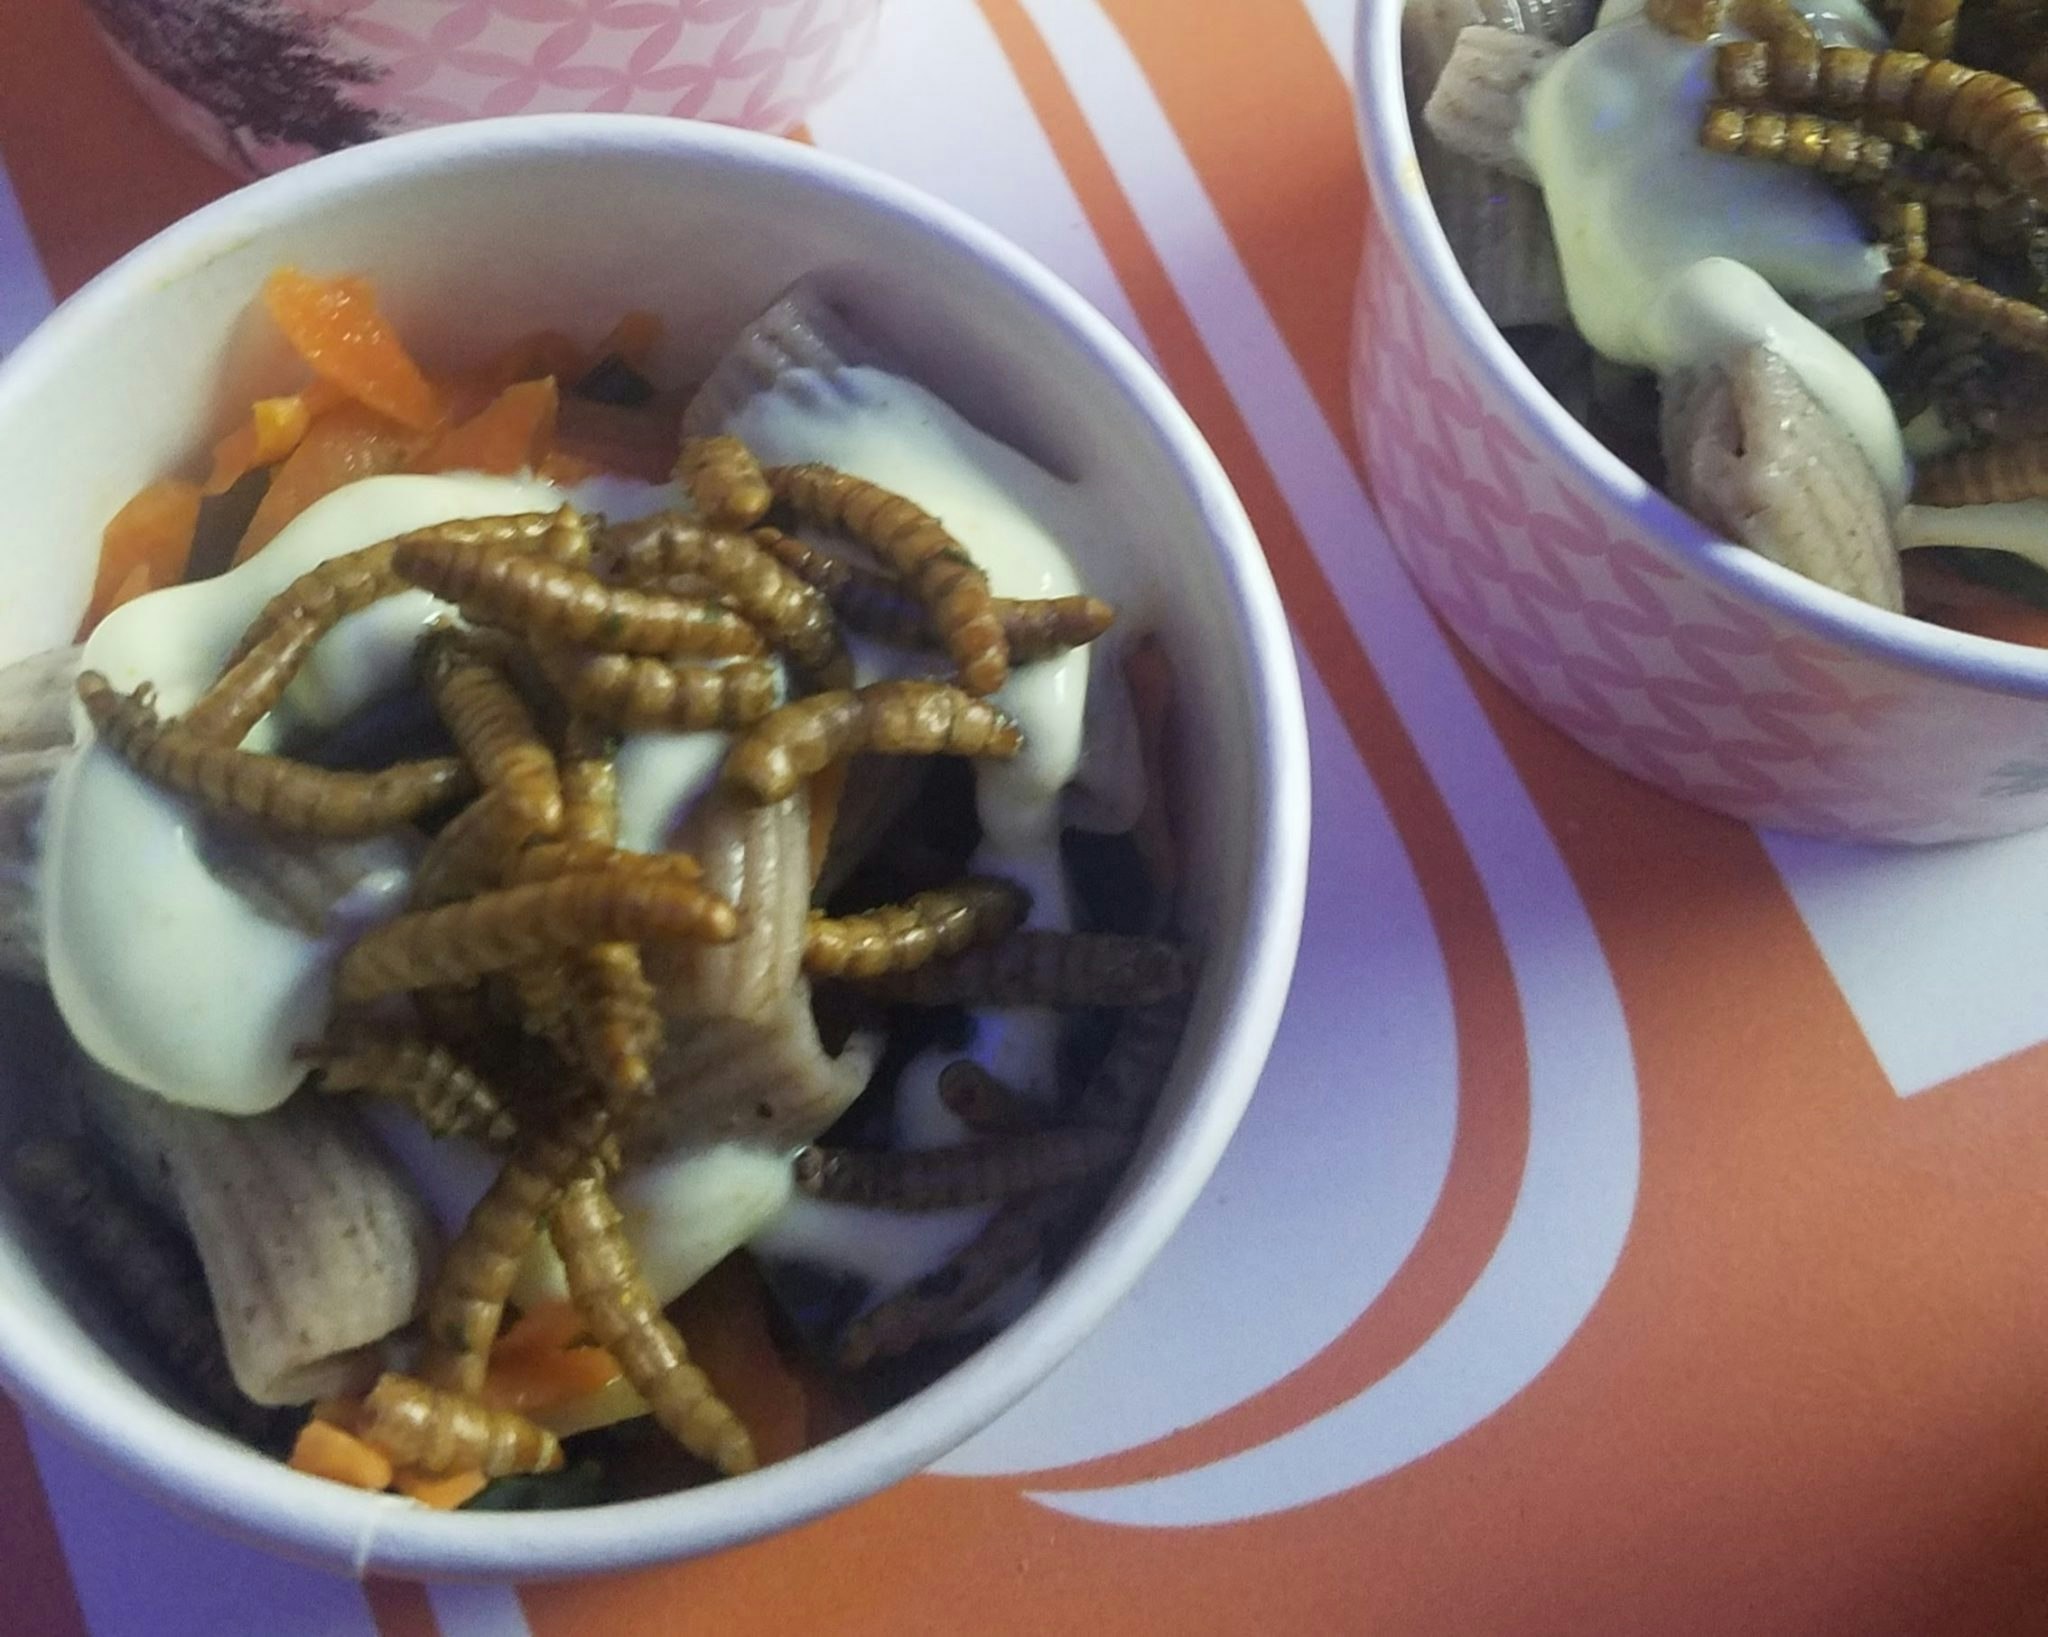 Jimini's edible insects on top of pasta on offer at the Hello Tomorrow tech conference